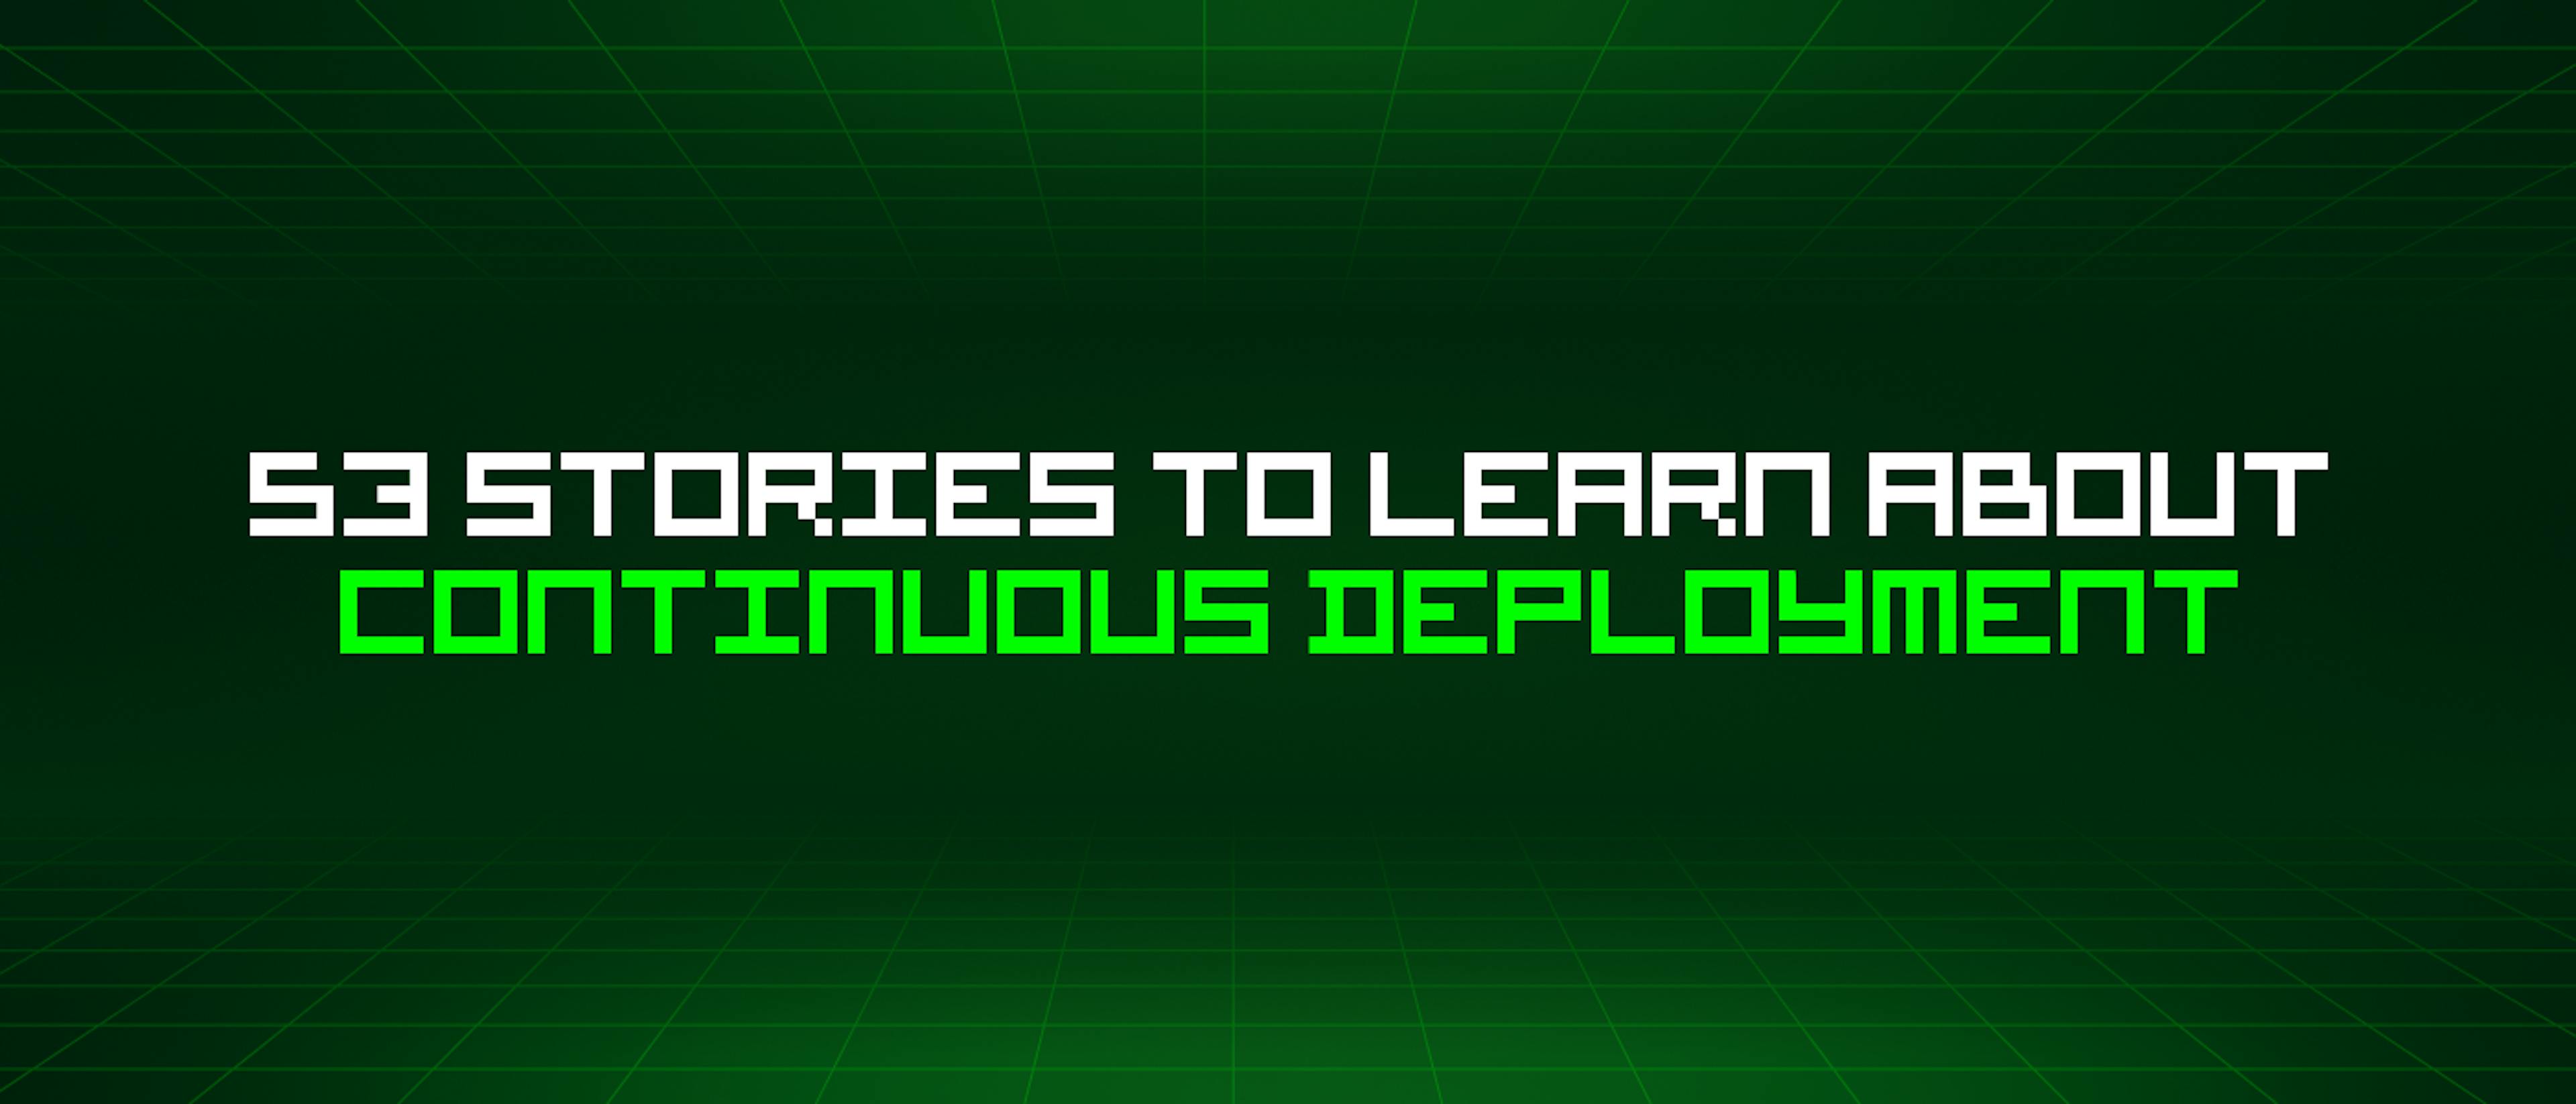 featured image - 53 Stories To Learn About Continuous Deployment